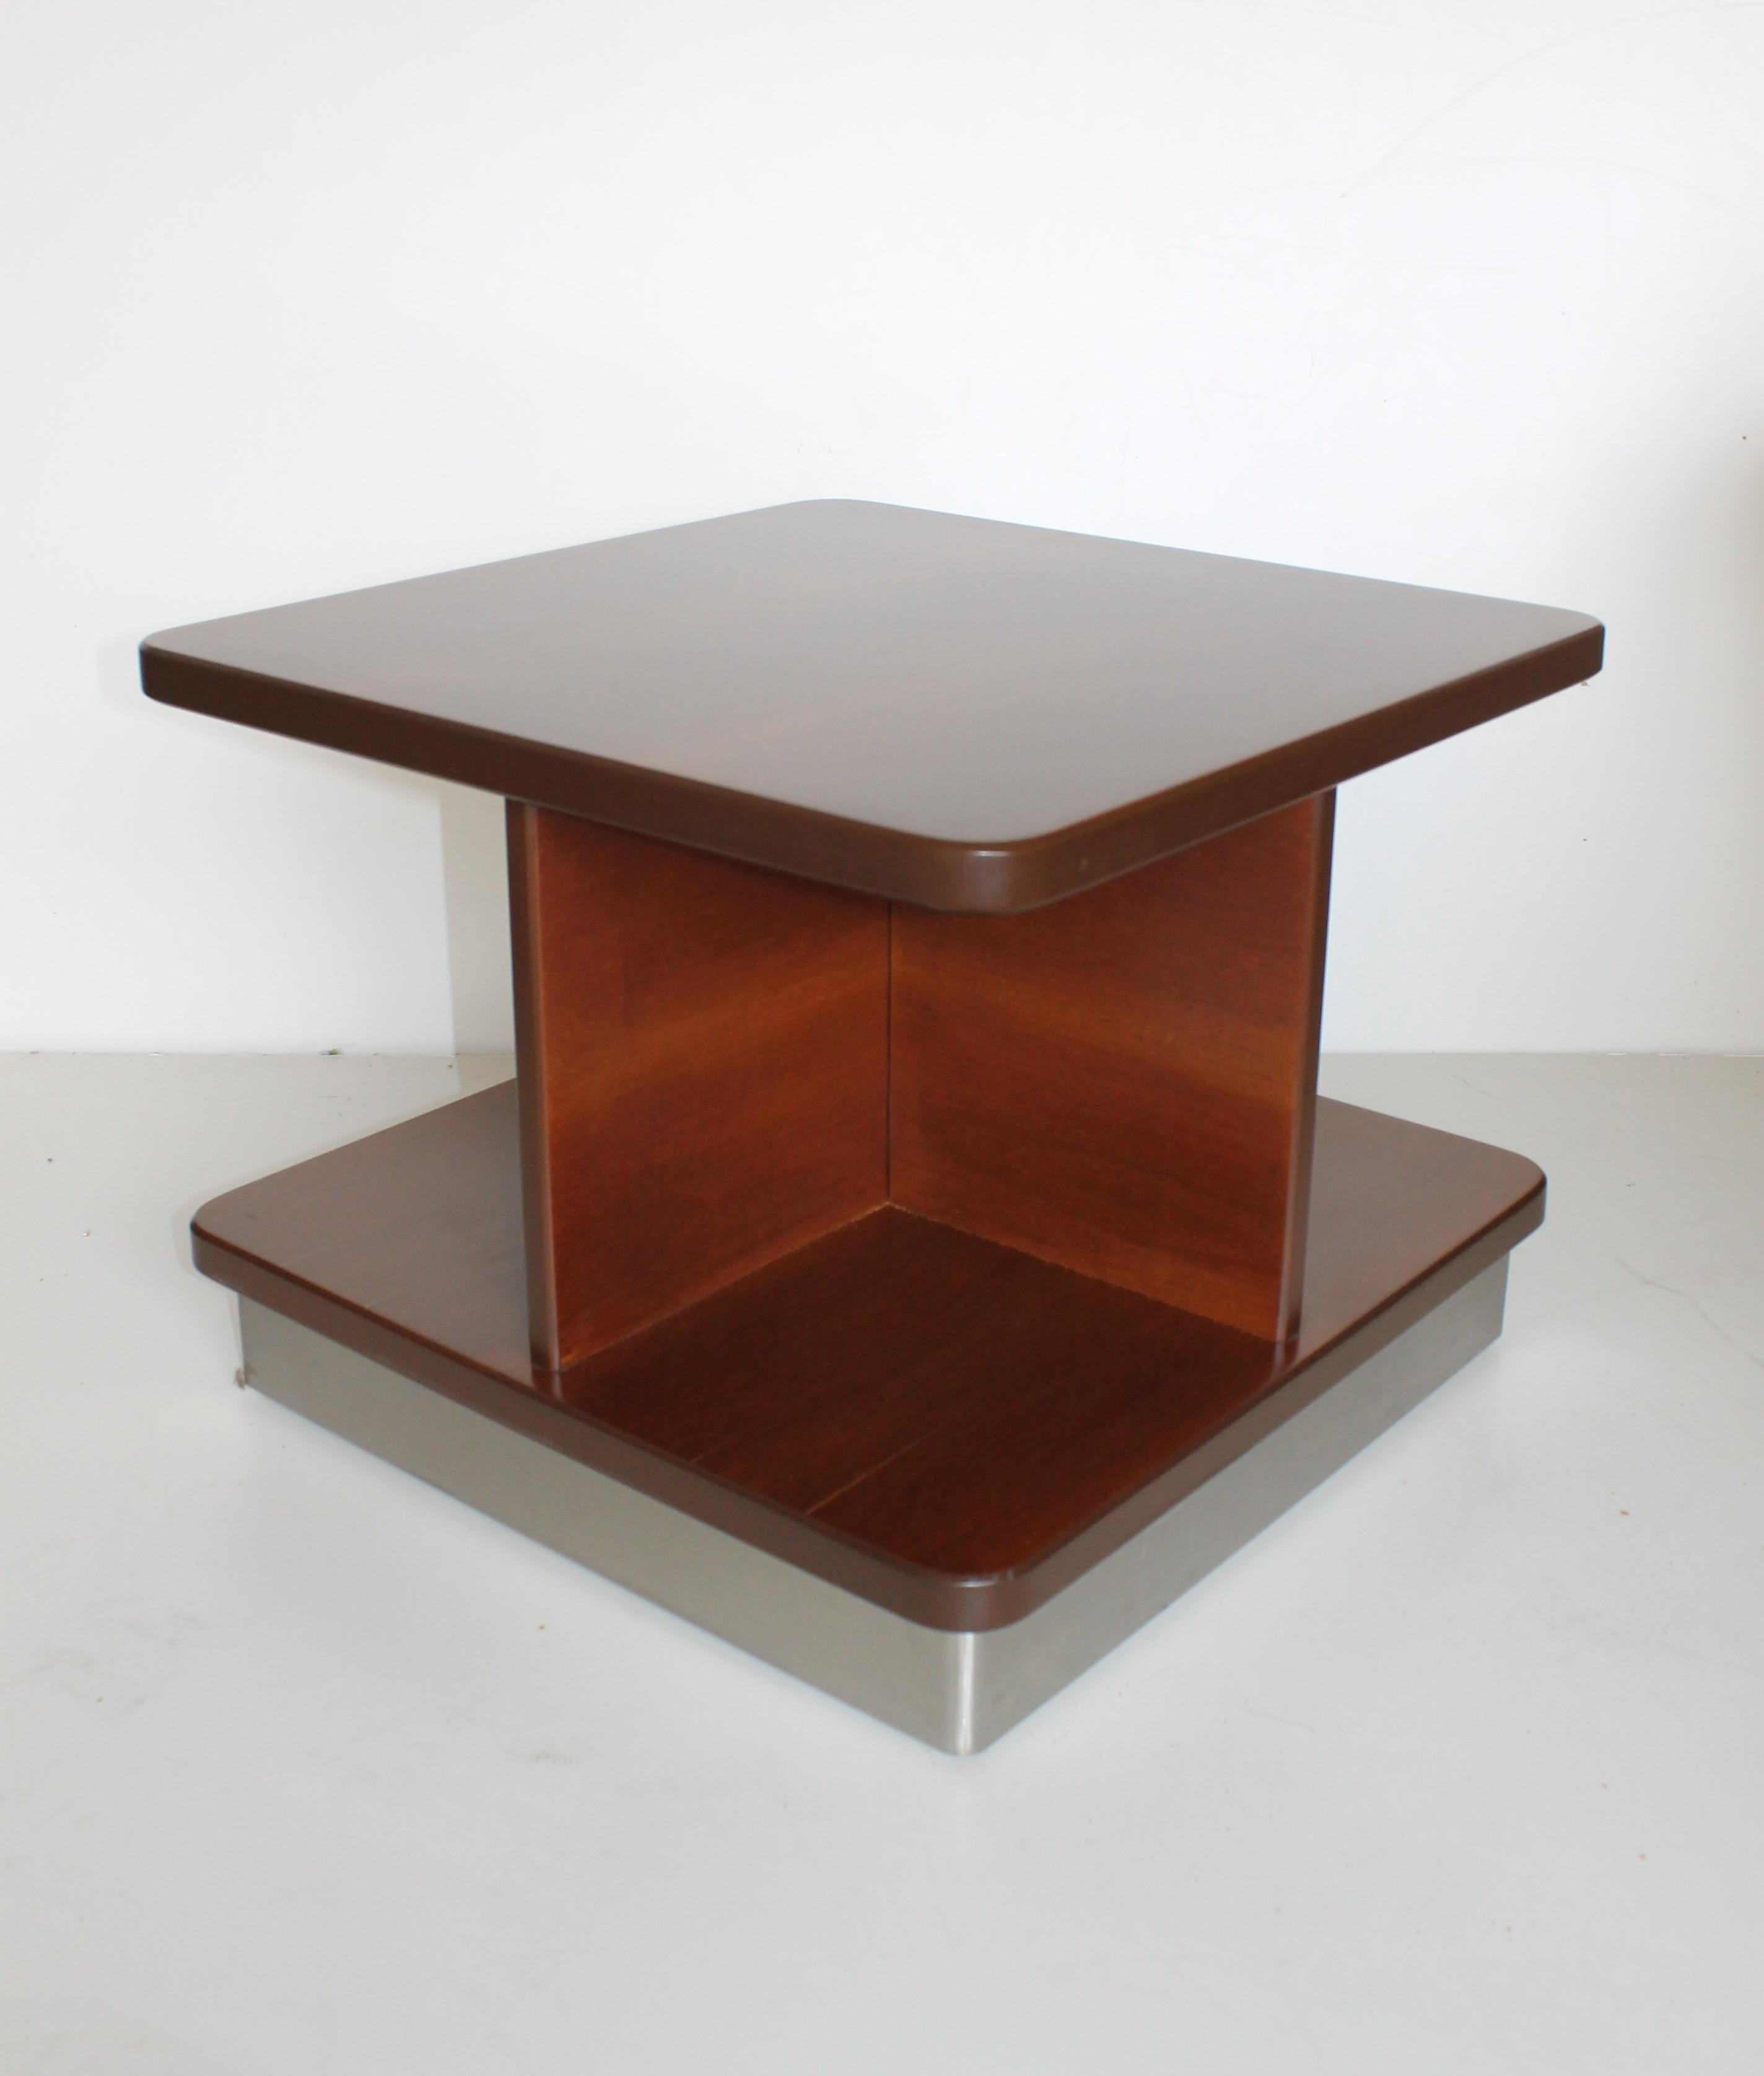 Formanova 1978 rosewood coffee or sofas table with wheels.

Formanova born from the creativity, passion of Gianni Moscatelli.
In 1959, after having graduated from the Higher Institute of Design, founded the company, creating a line of products,